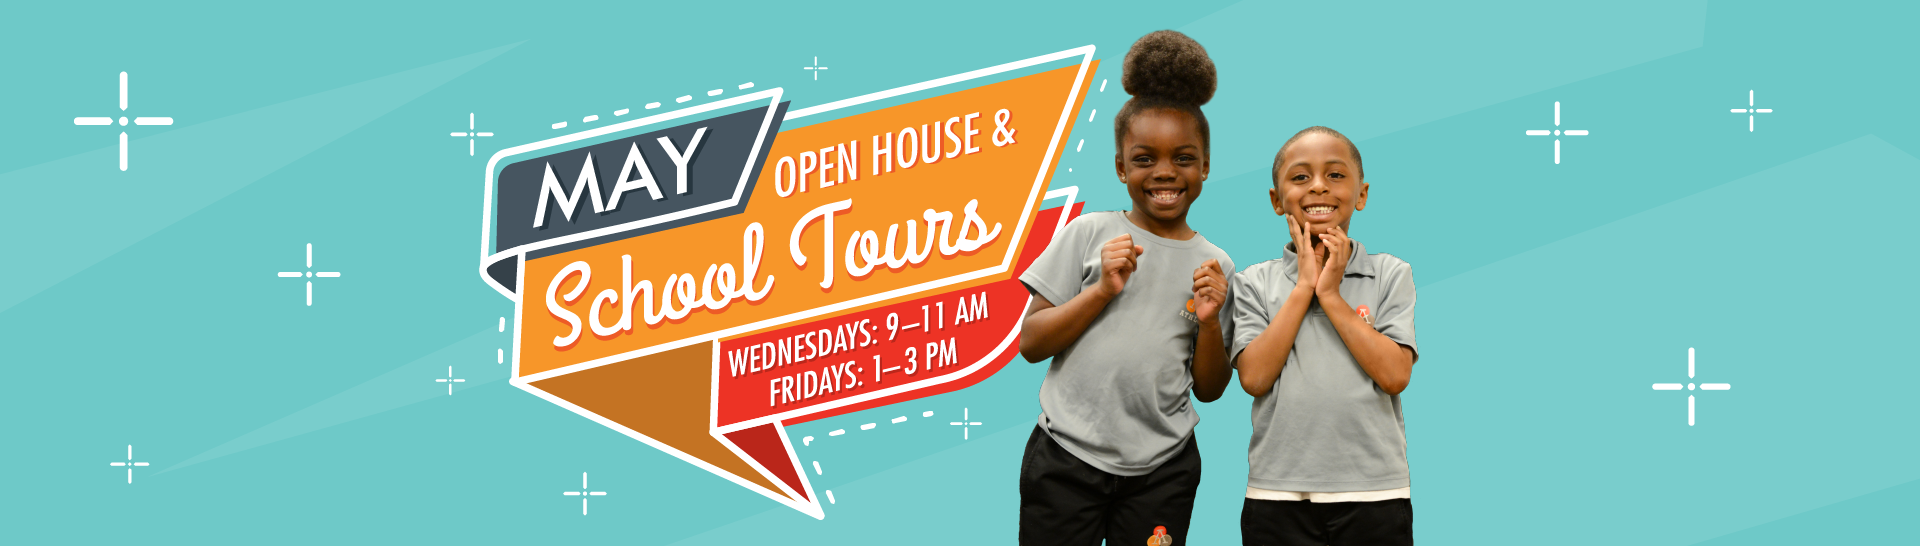 May Open House Tours